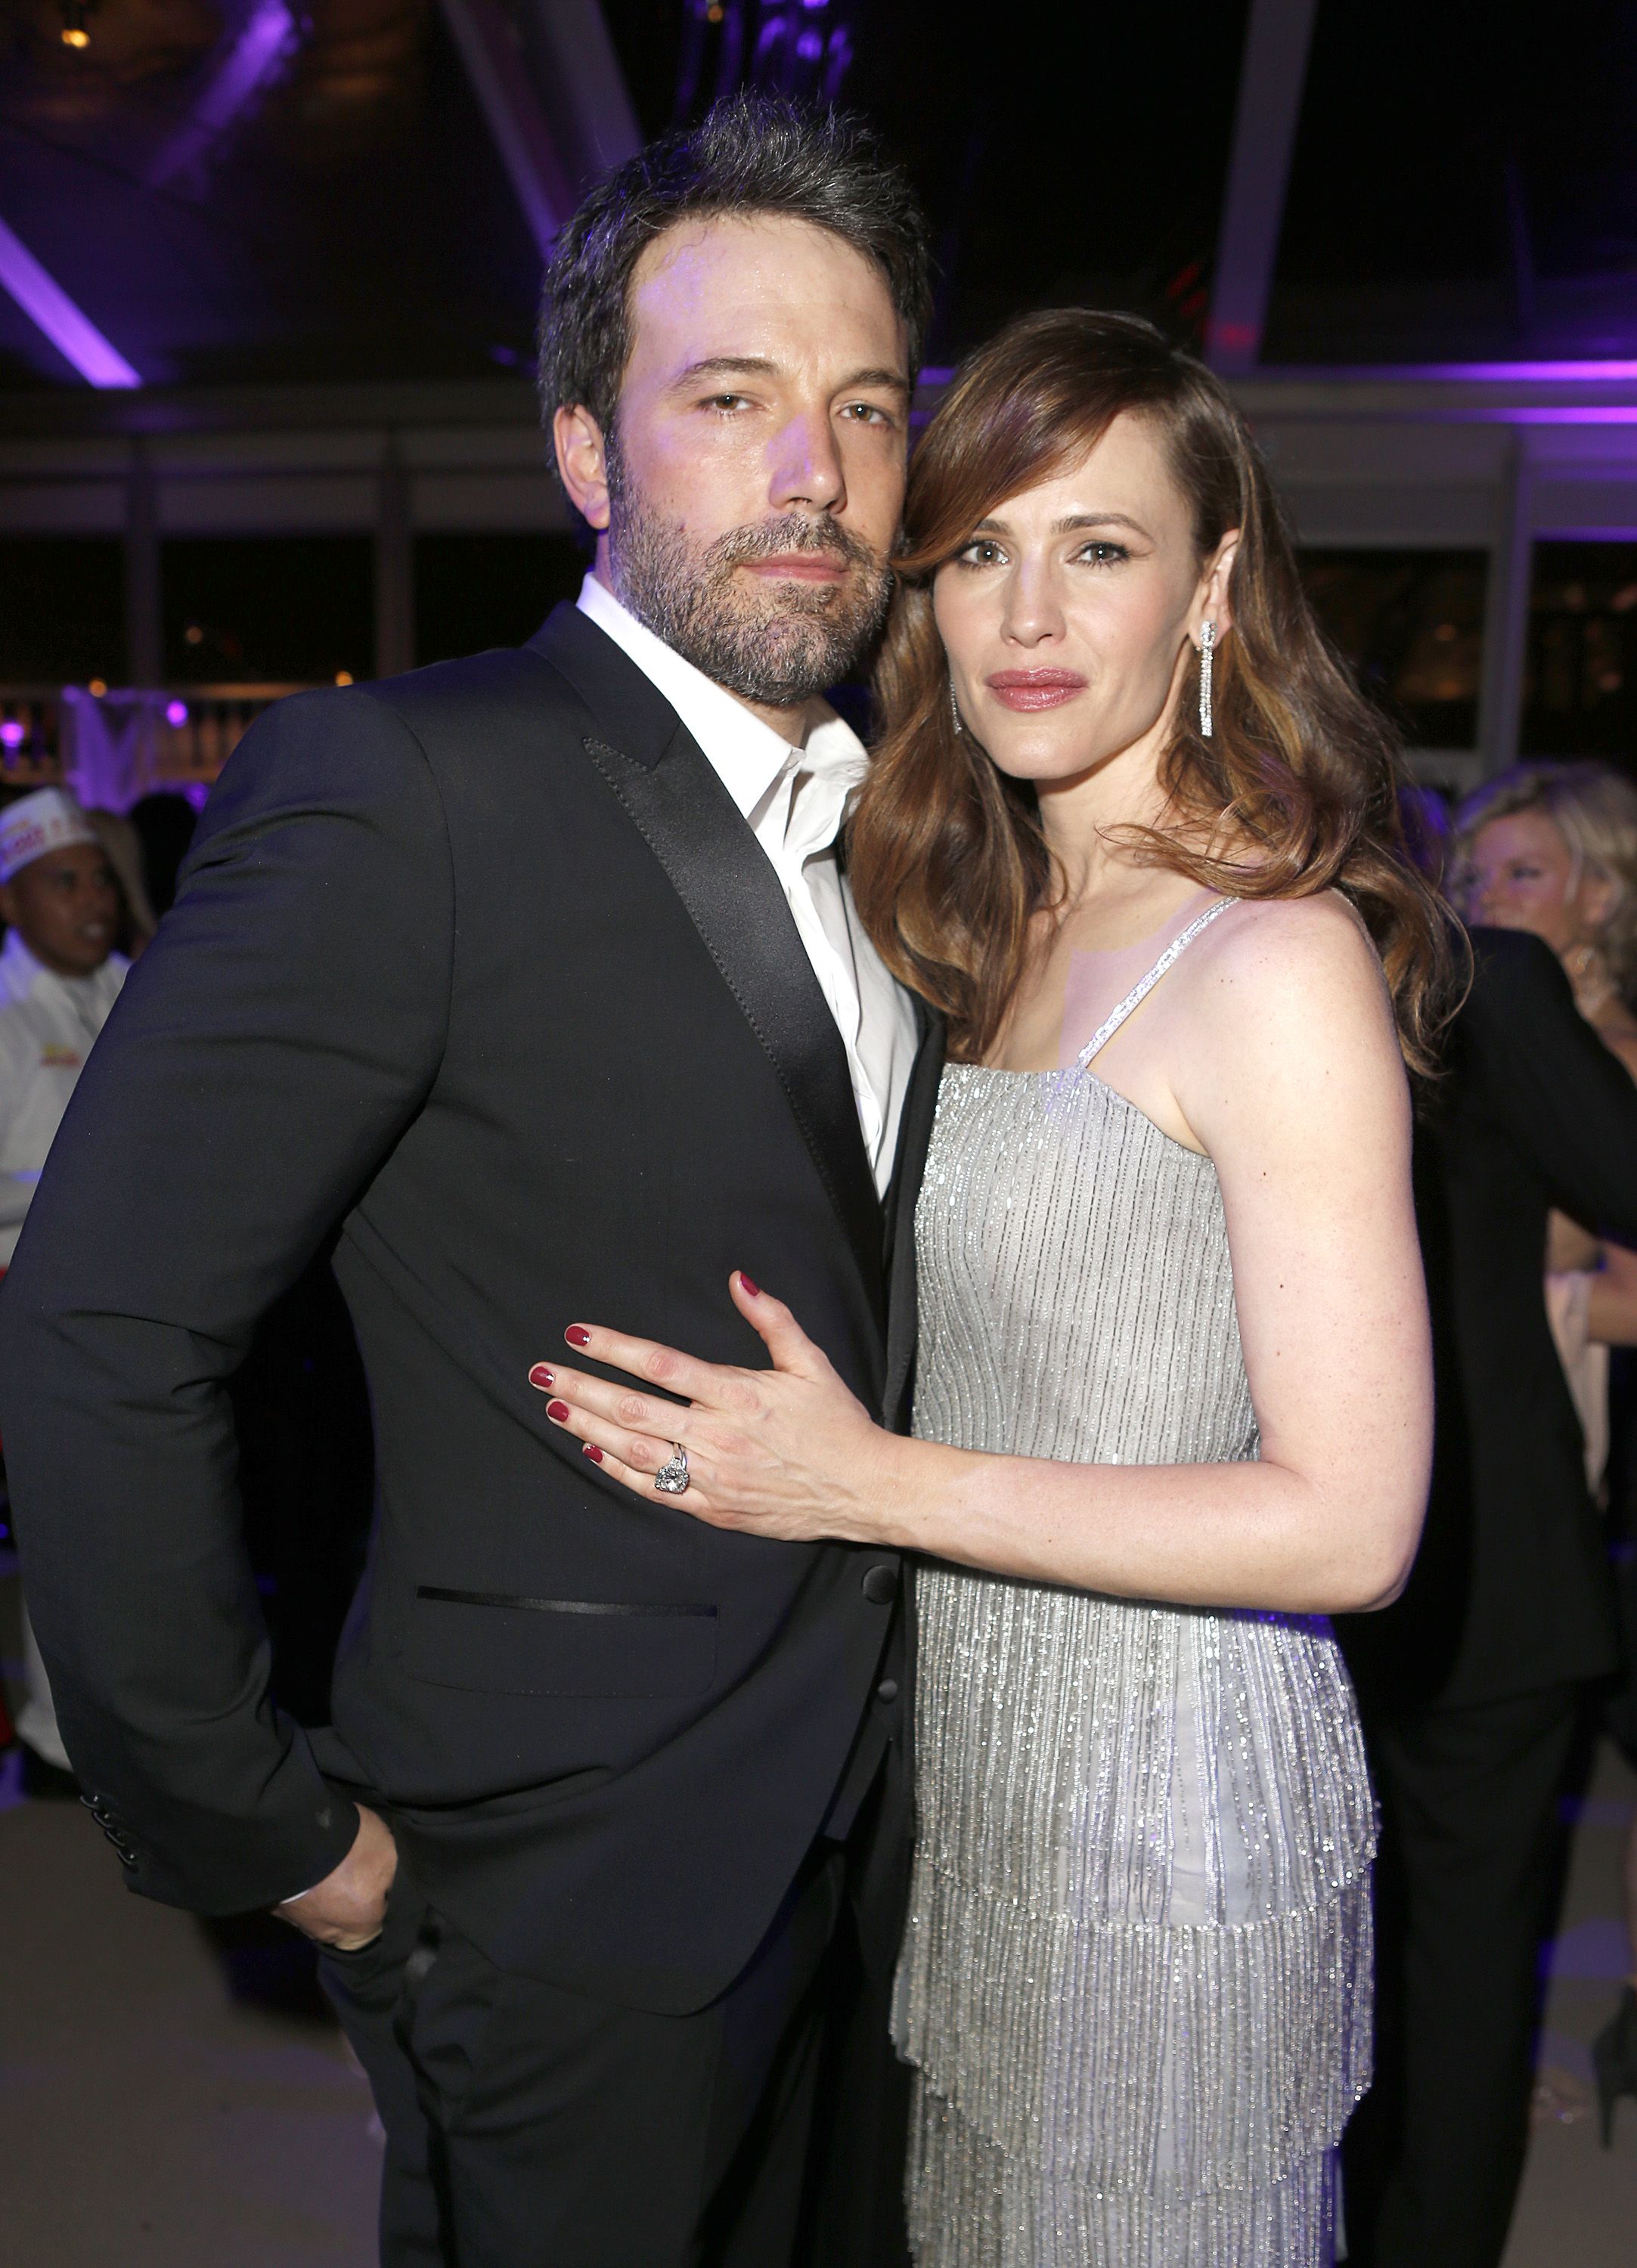 Jennifer Garner and Ben Affleck in &#39;No Rush&#39; to Finalize Divorce - Garner-Affleck Divorce Case Could Be Thrown Out